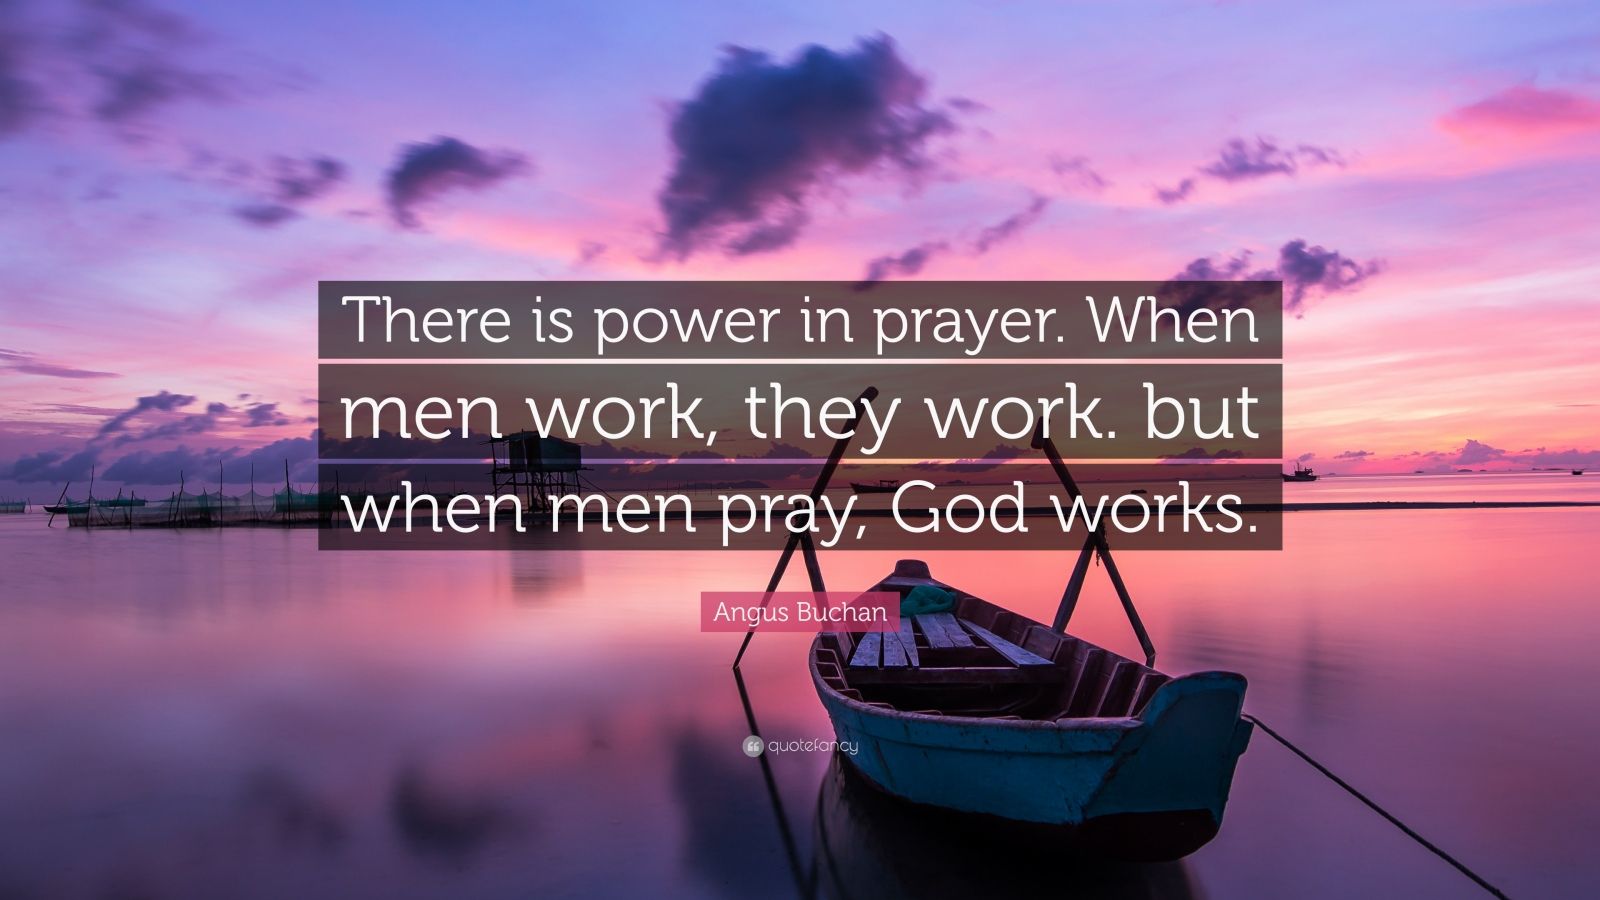 Angus Buchan Quote: “There is power in prayer. When men ...